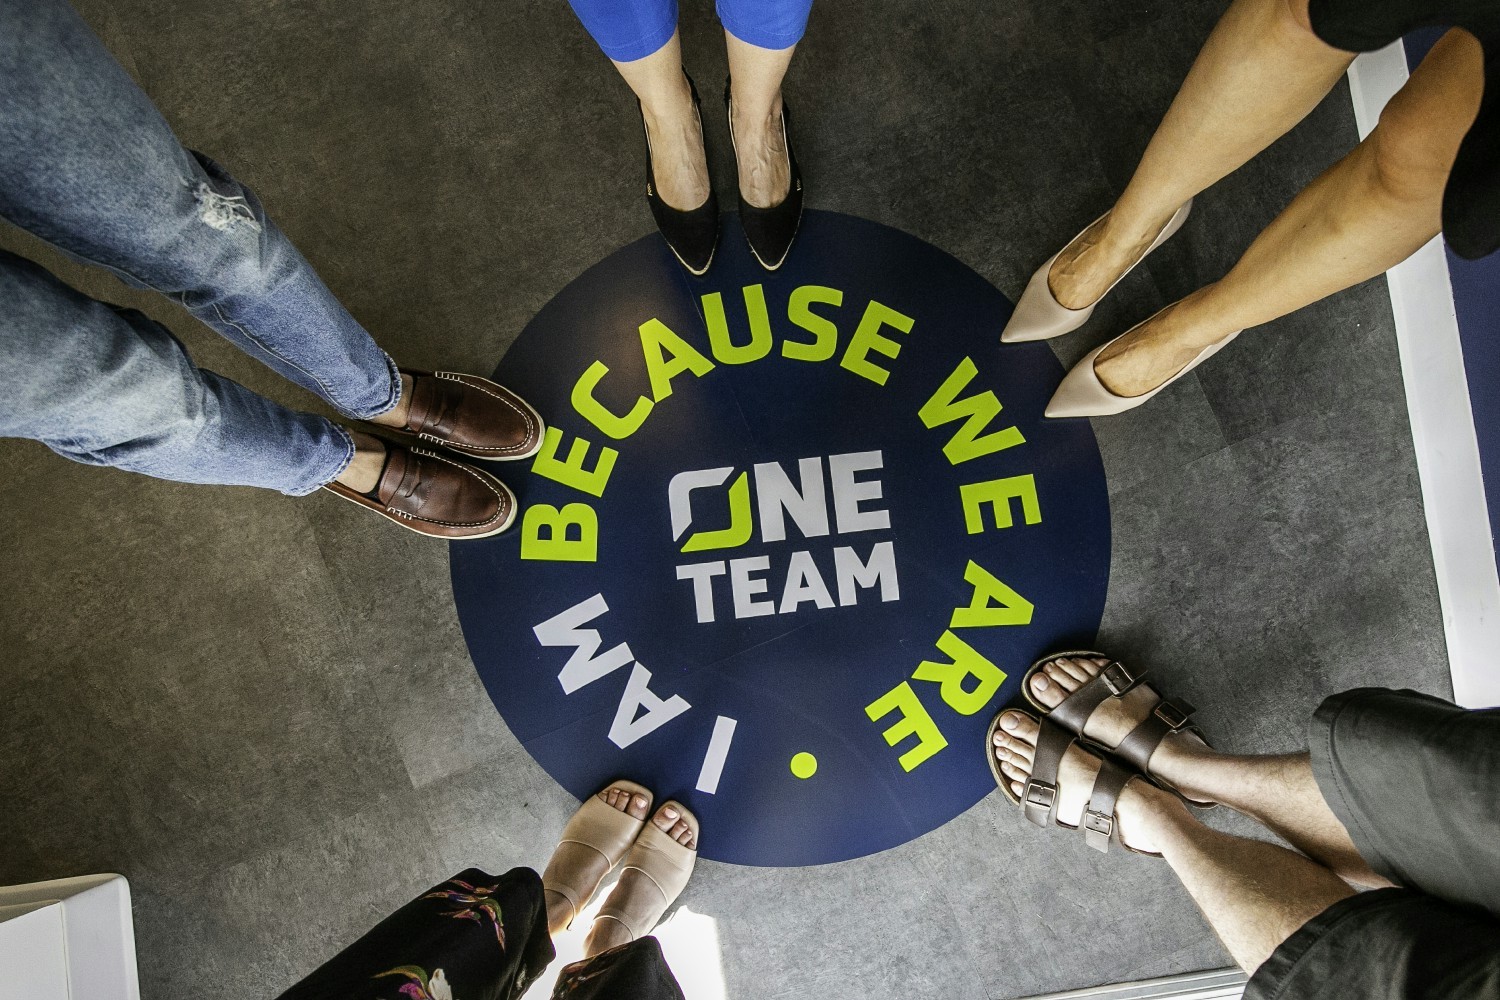 Company motto: I am because we are. One team. 